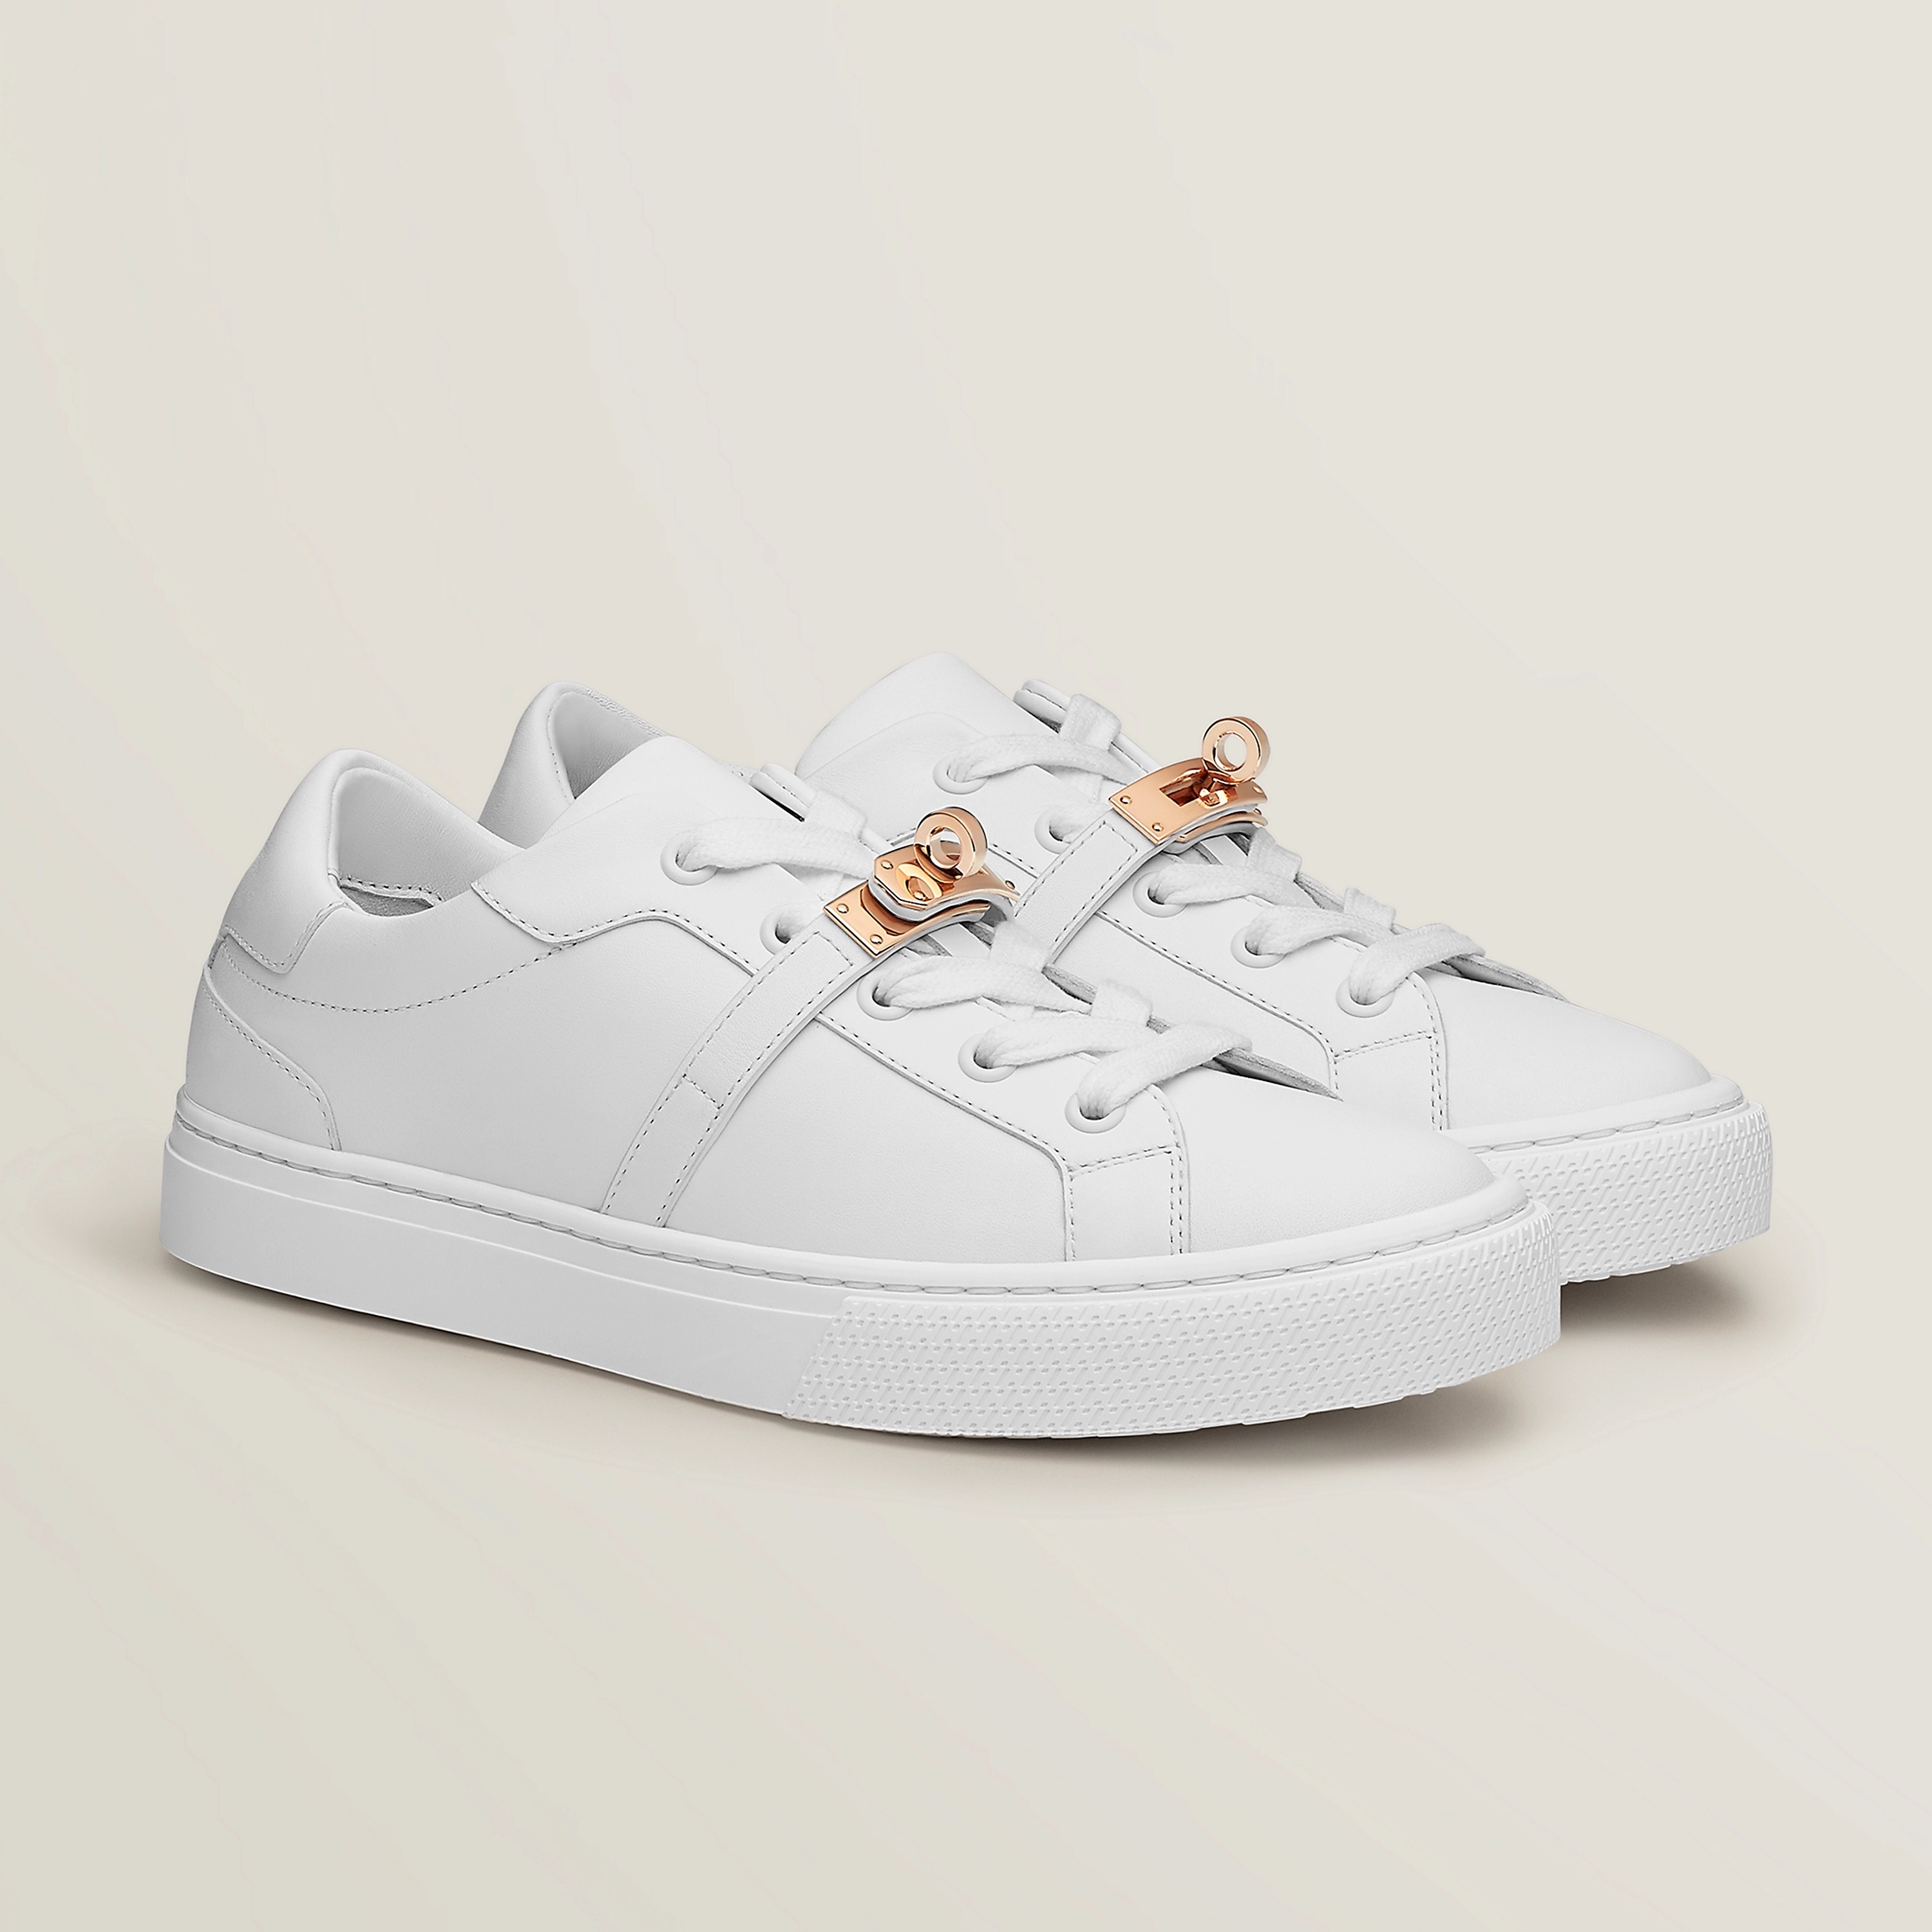 Blanc Day Sneaker in calfskin with functional rose gold-plated Kelly buckle, $1250. Photo via Hermès.com.